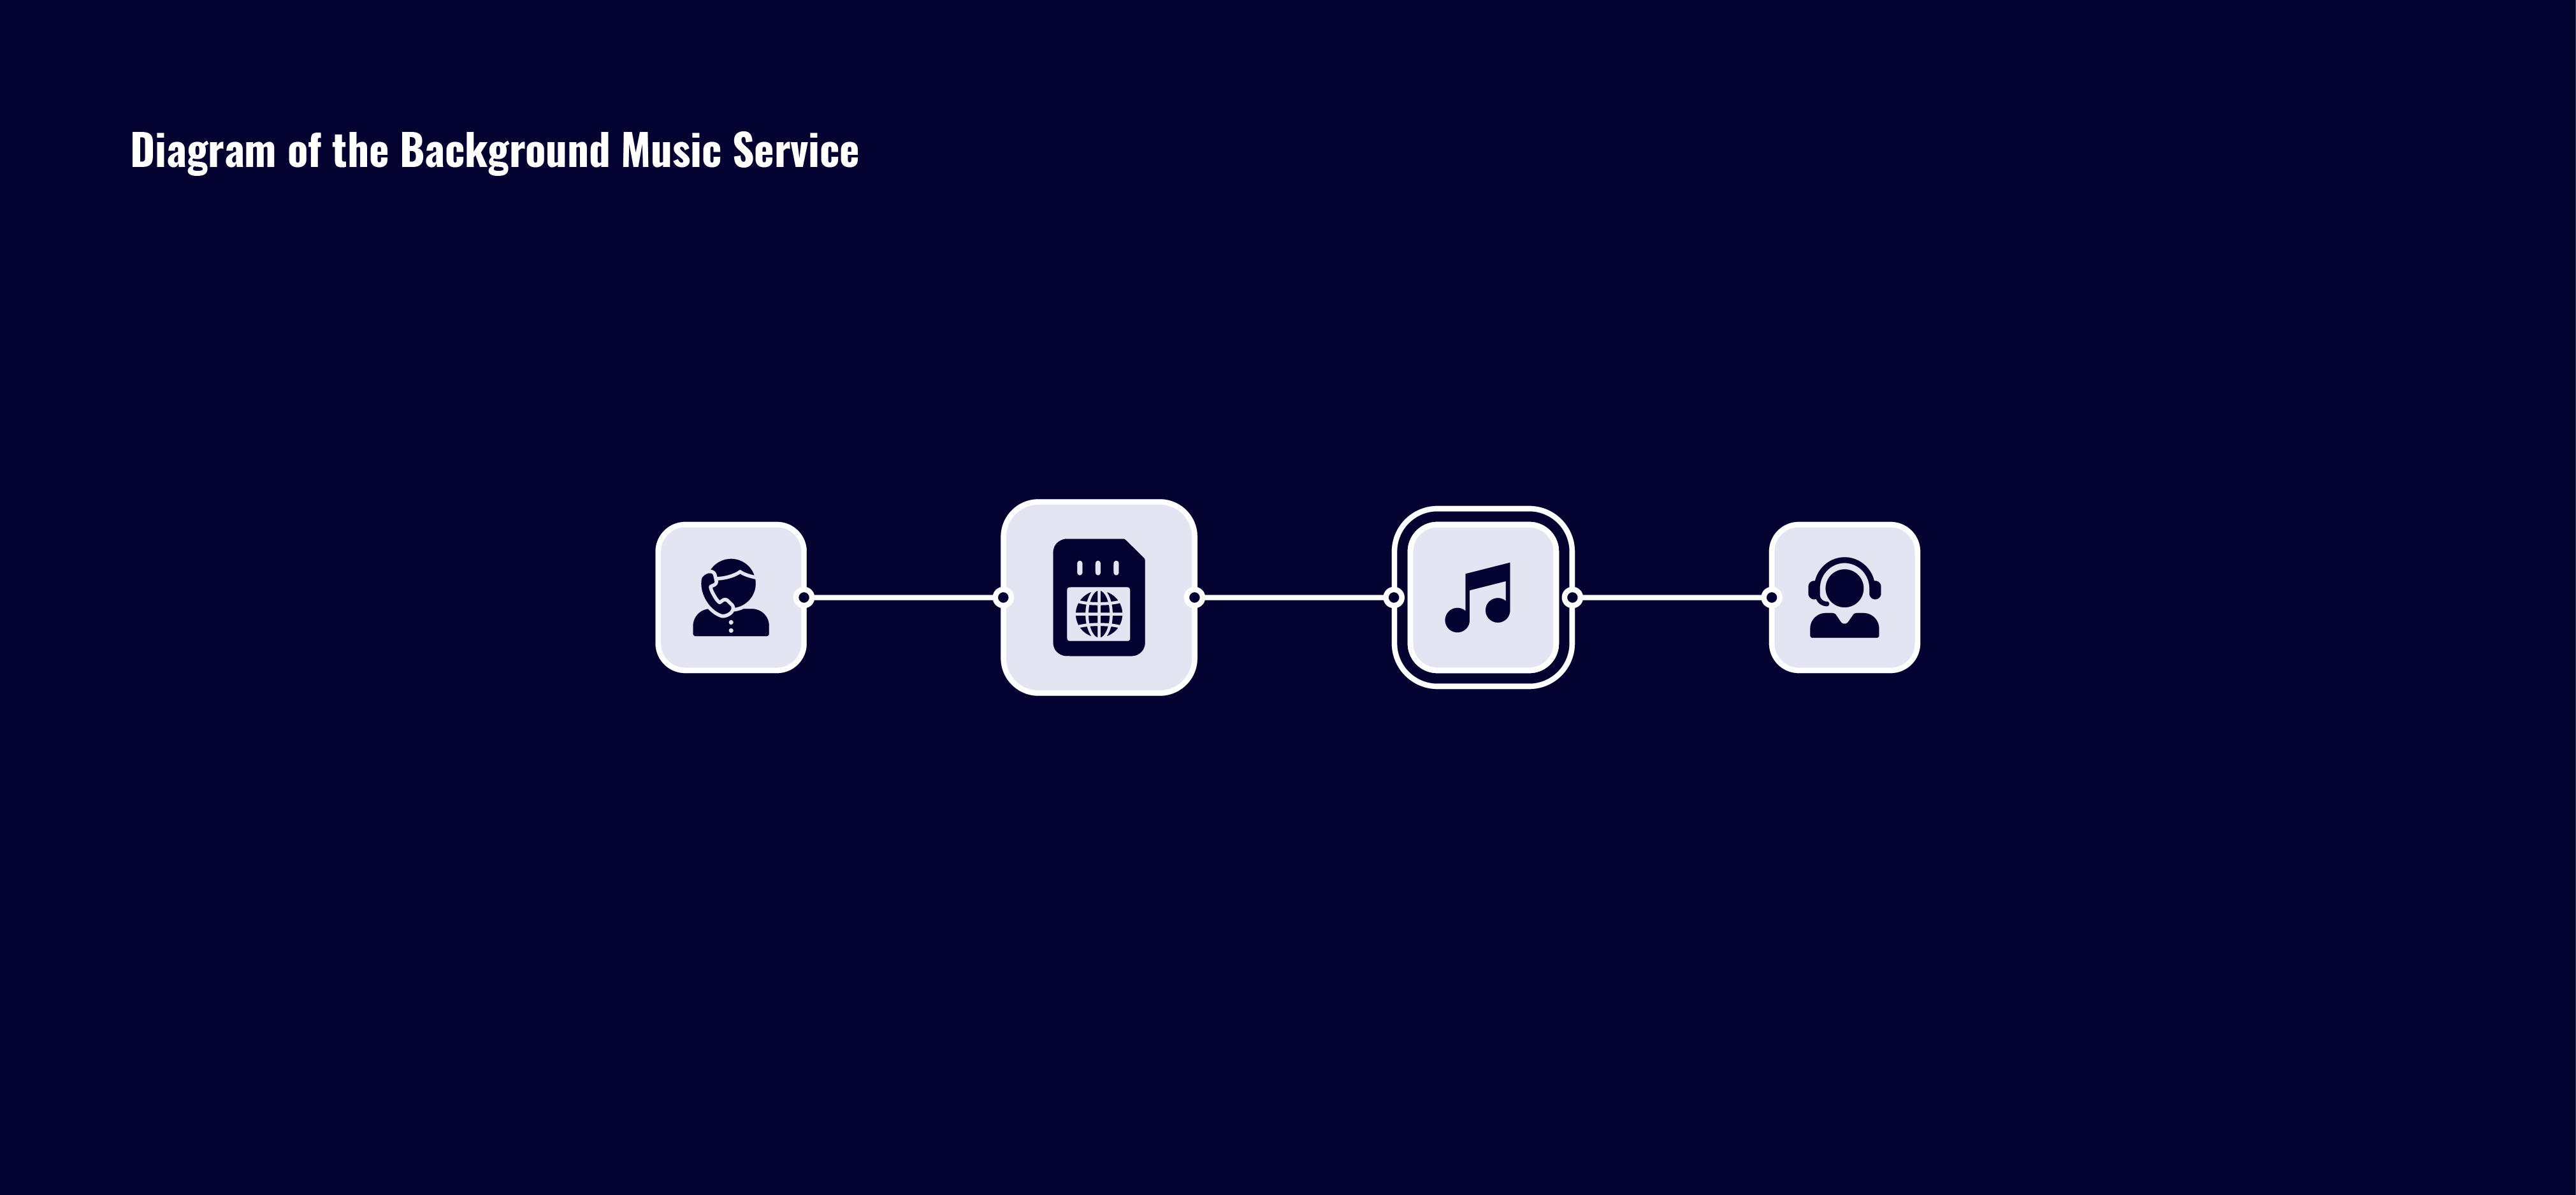 Hold music service working service